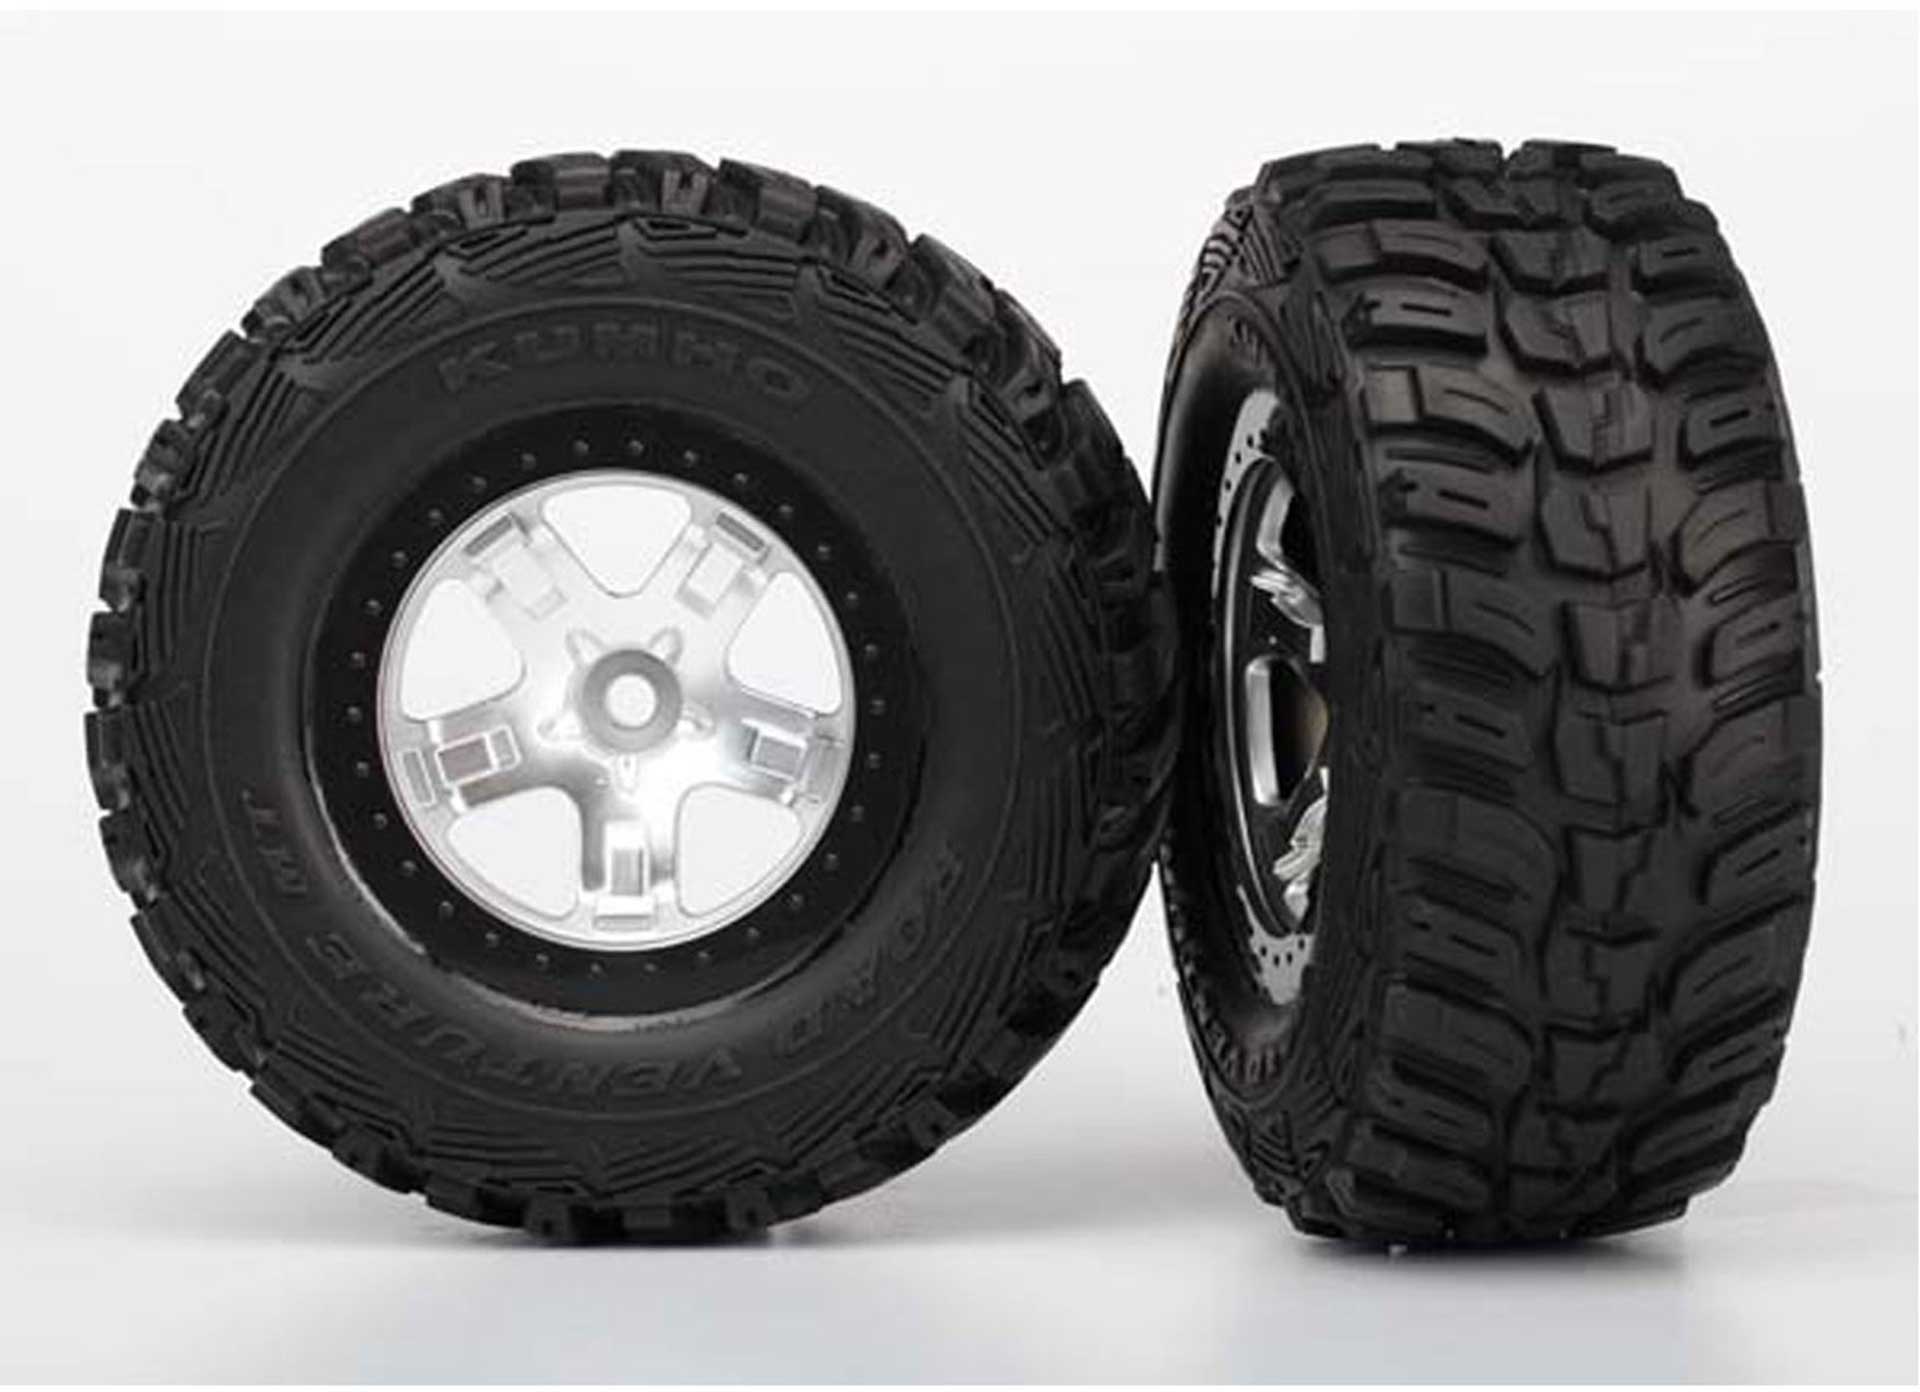 TRAXXAS ROUES MONTEES COLLEES KUMHO POUR 4X4 AVANT/ARRIERE - 4X2 ARRIERE (2)